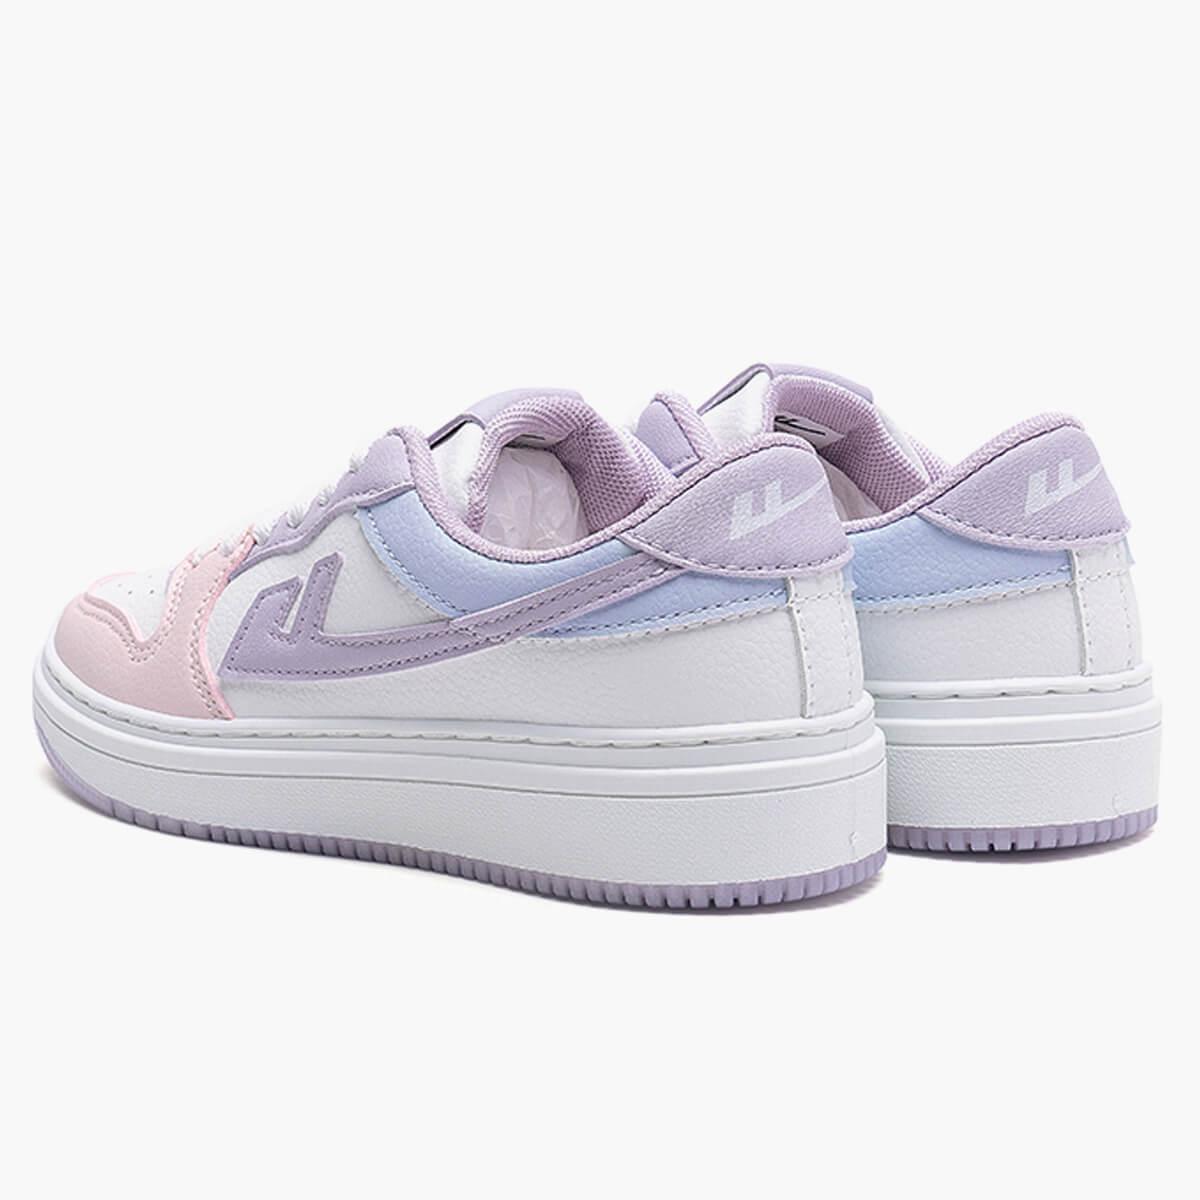 Pastel Purple Aesthetic Sneakers - Aesthetic Clothes Shop